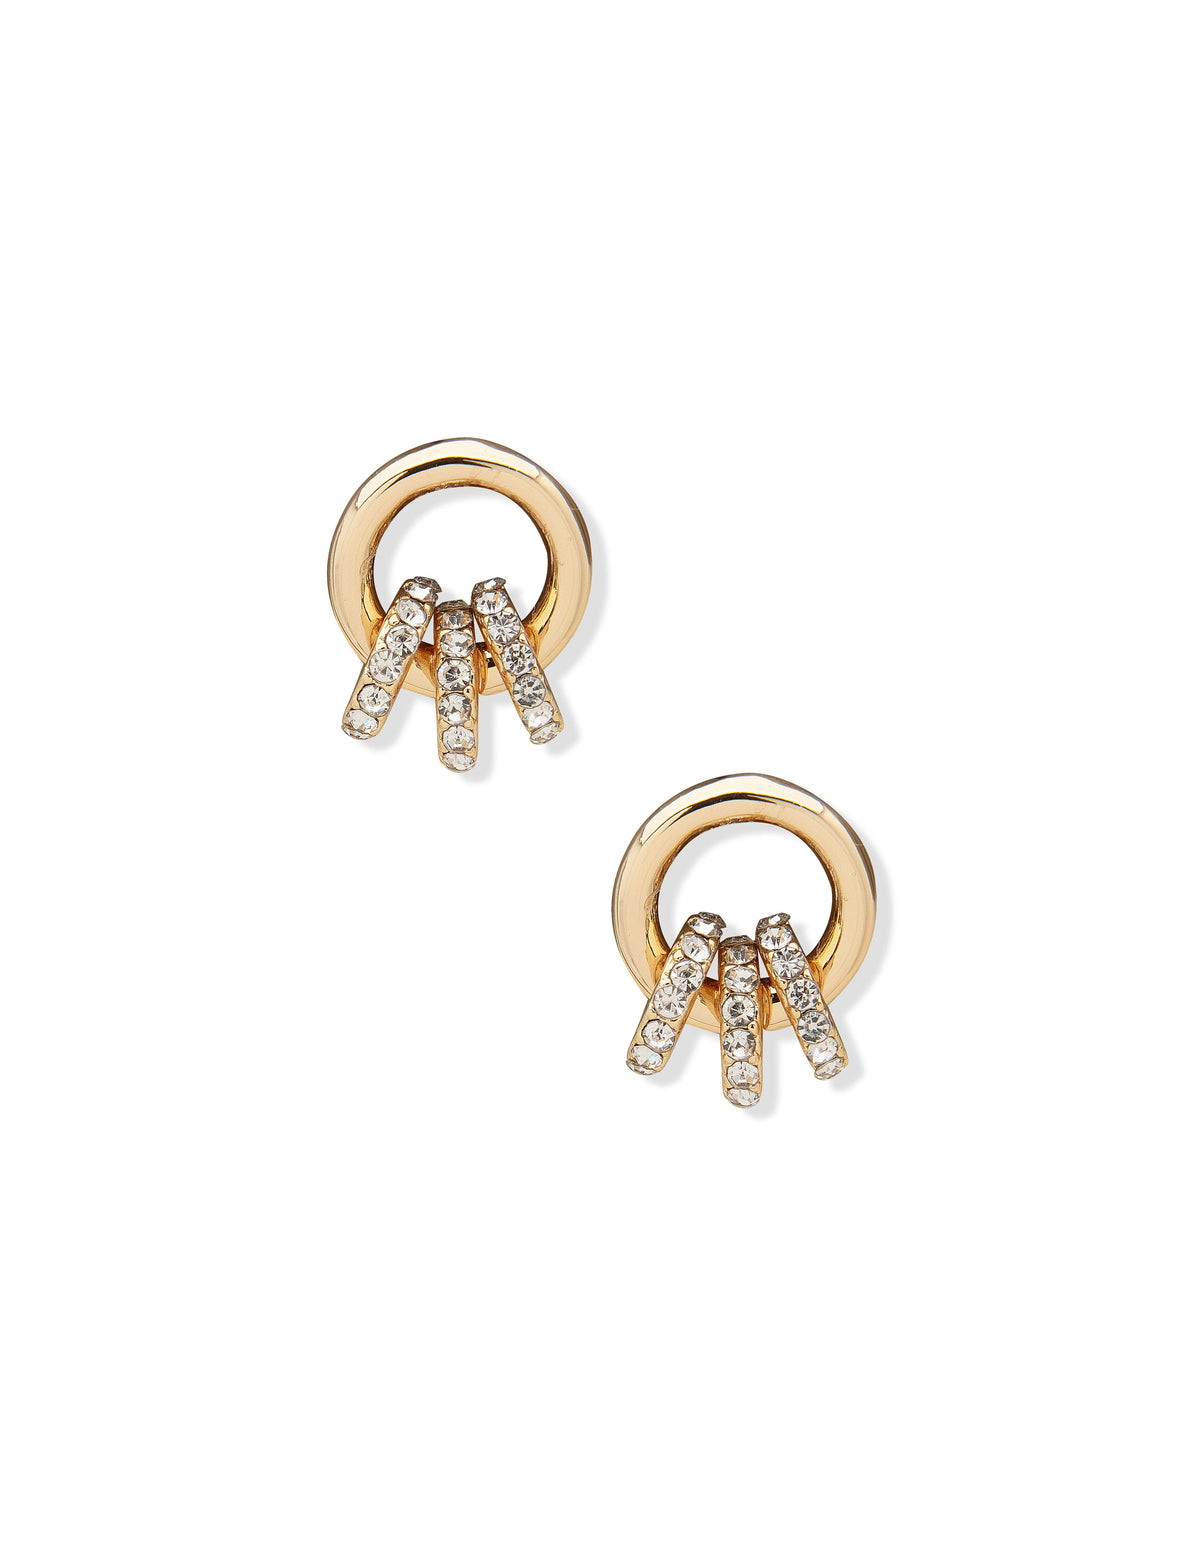 Anne Klein Gold-Tone Drop Earrings with Mini Pave Hoops